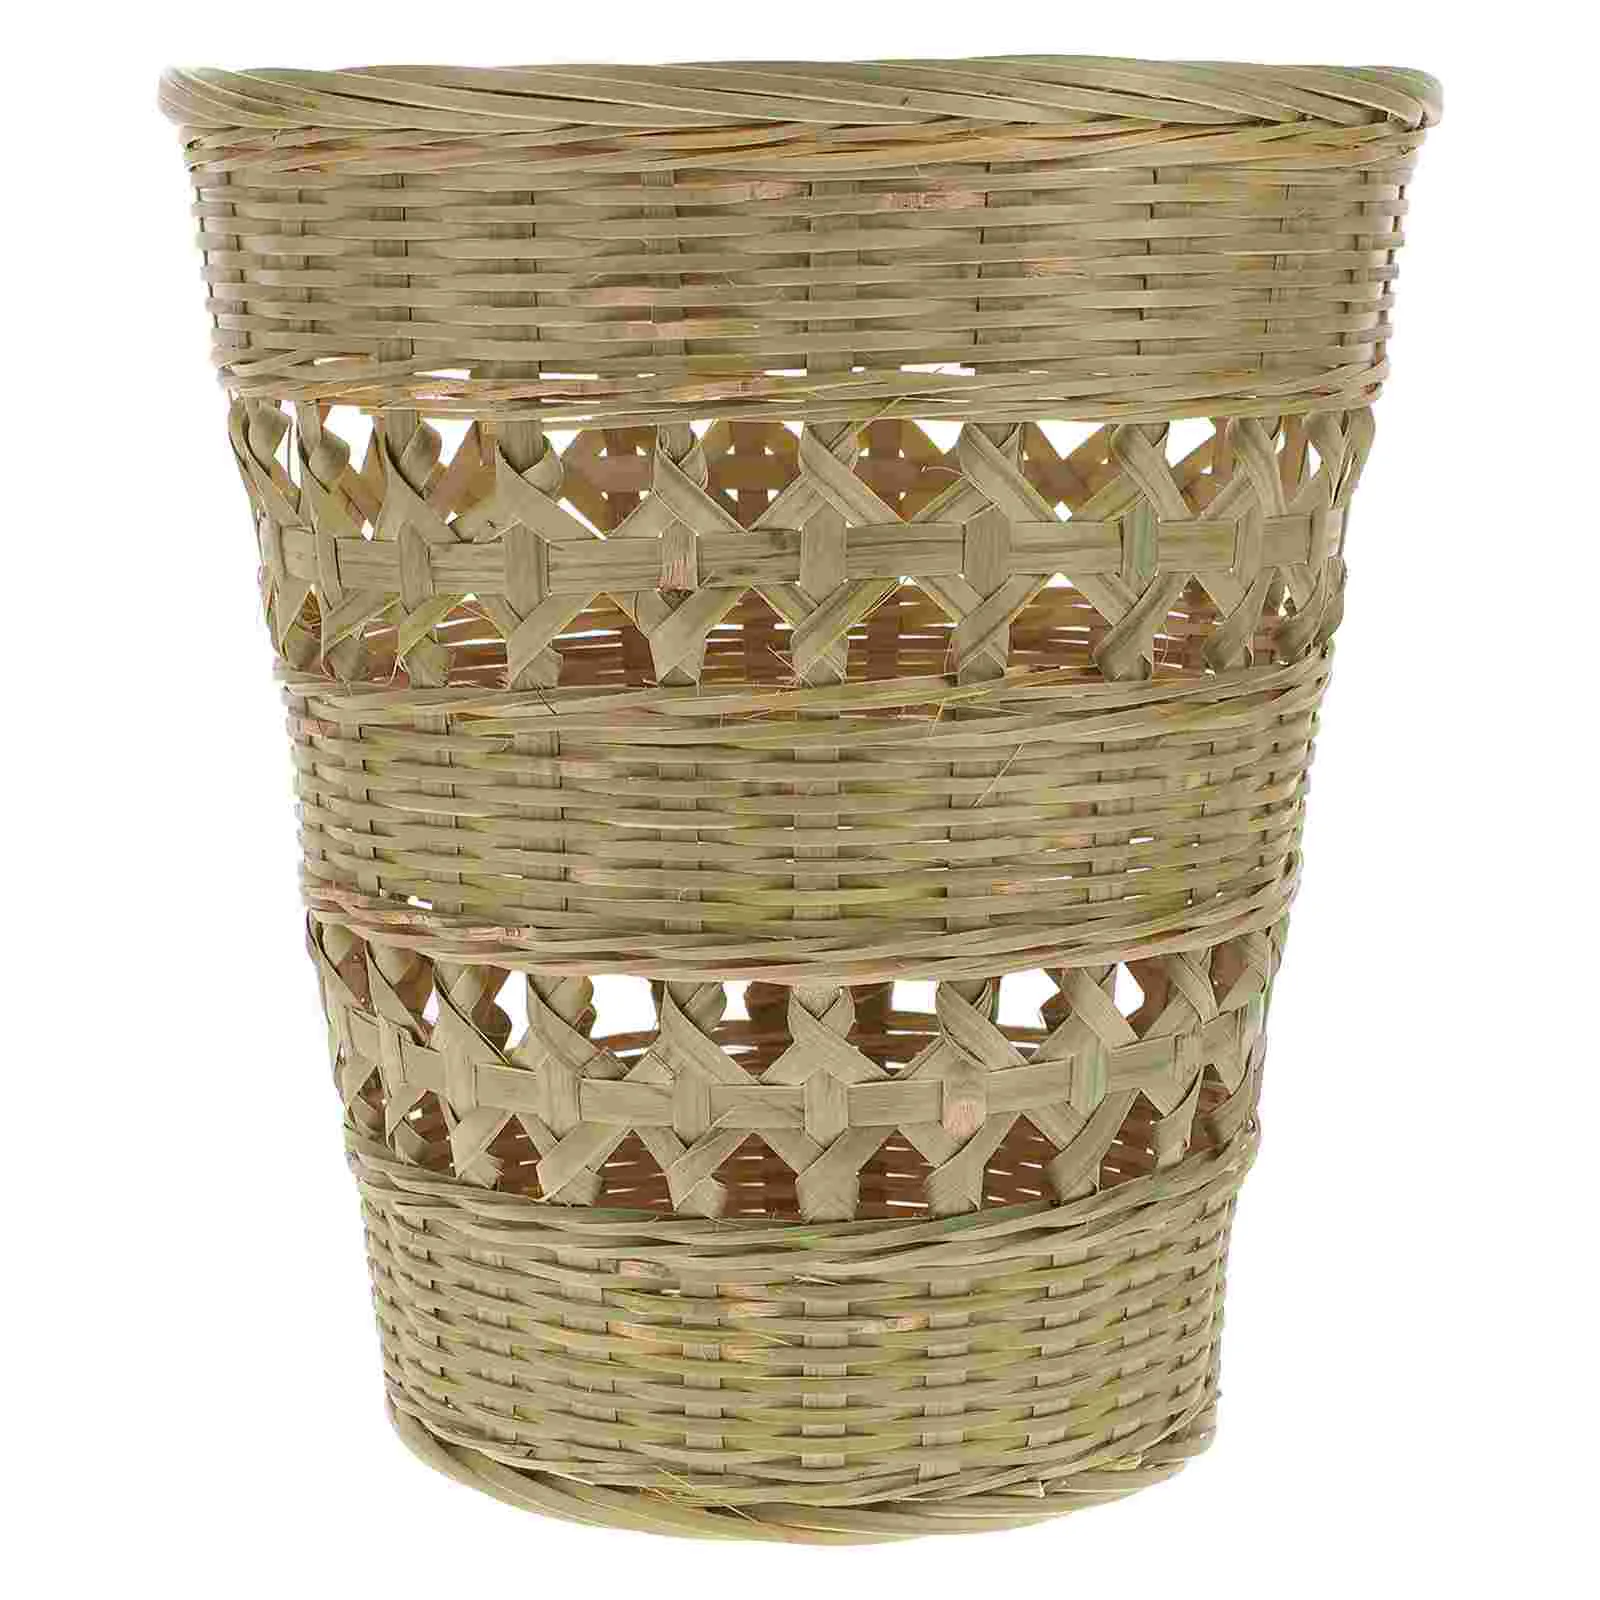 

Bamboo Trash Can Woven Laundry Basket with Lid Rustic Style Weaving Weave Rubbish Container Handmade Storage Office Manual